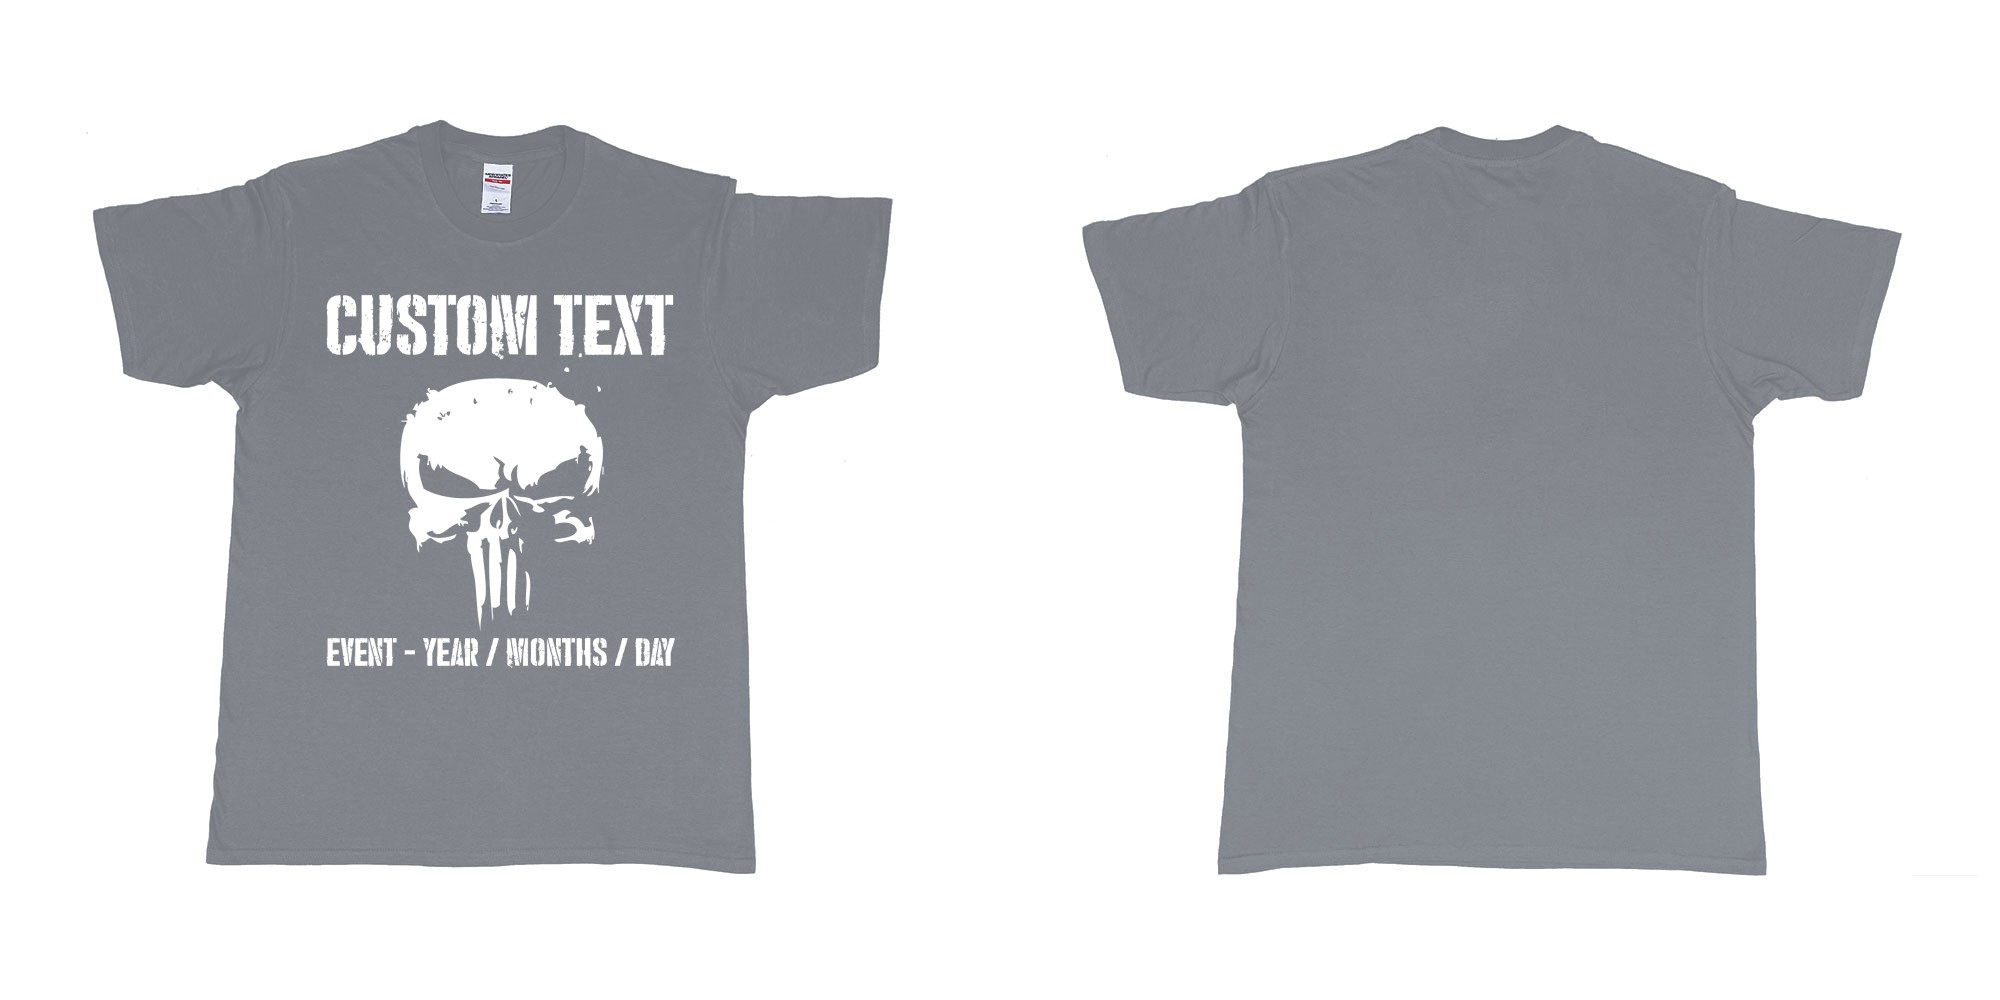 Custom tshirt design the punisher scull logo custom text in fabric color misty choice your own text made in Bali by The Pirate Way